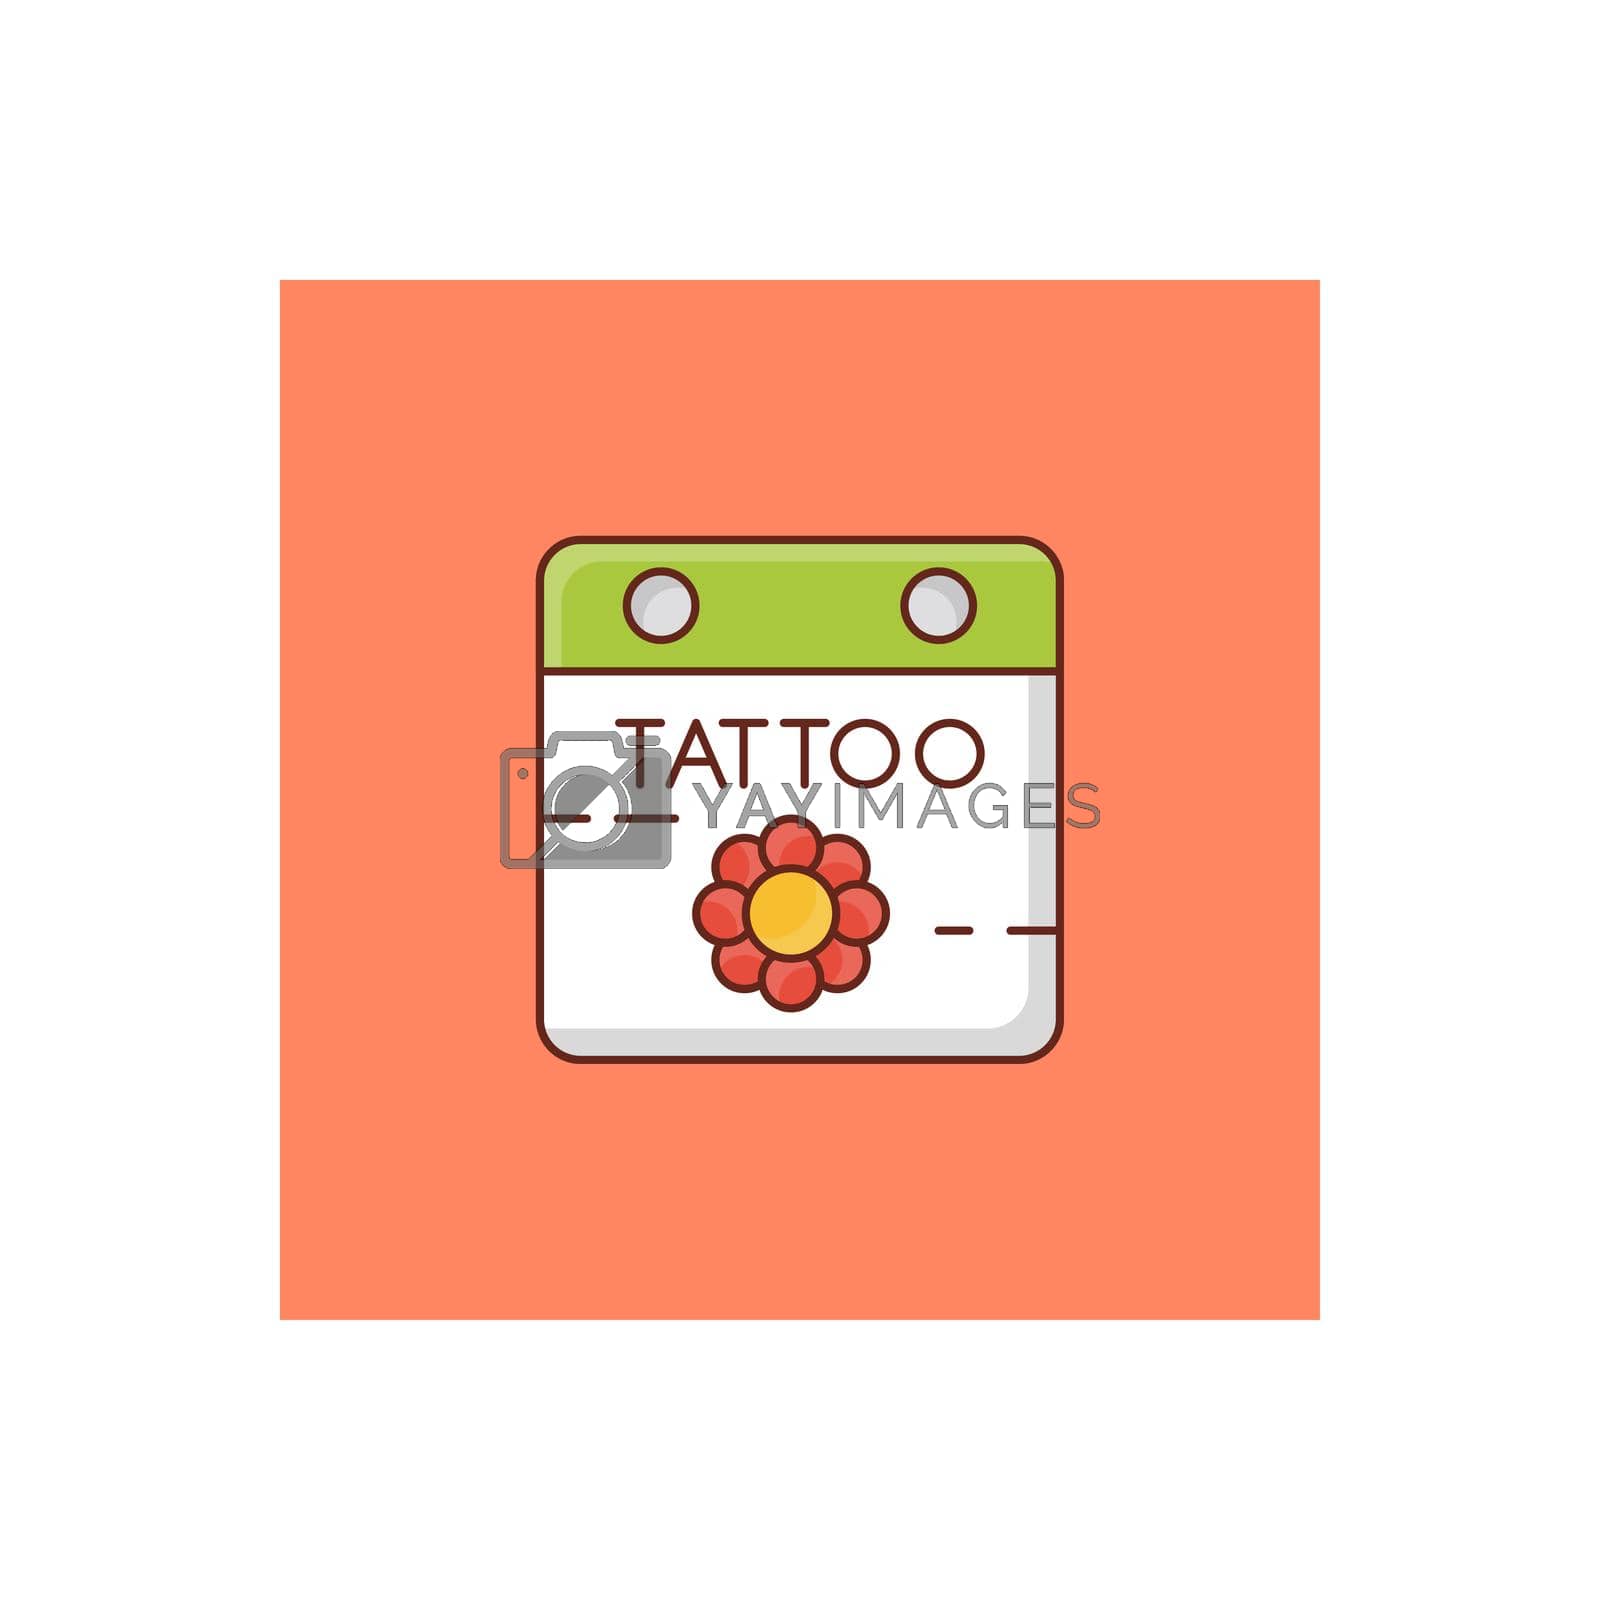 Royalty free image of tattoo by FlaticonsDesign